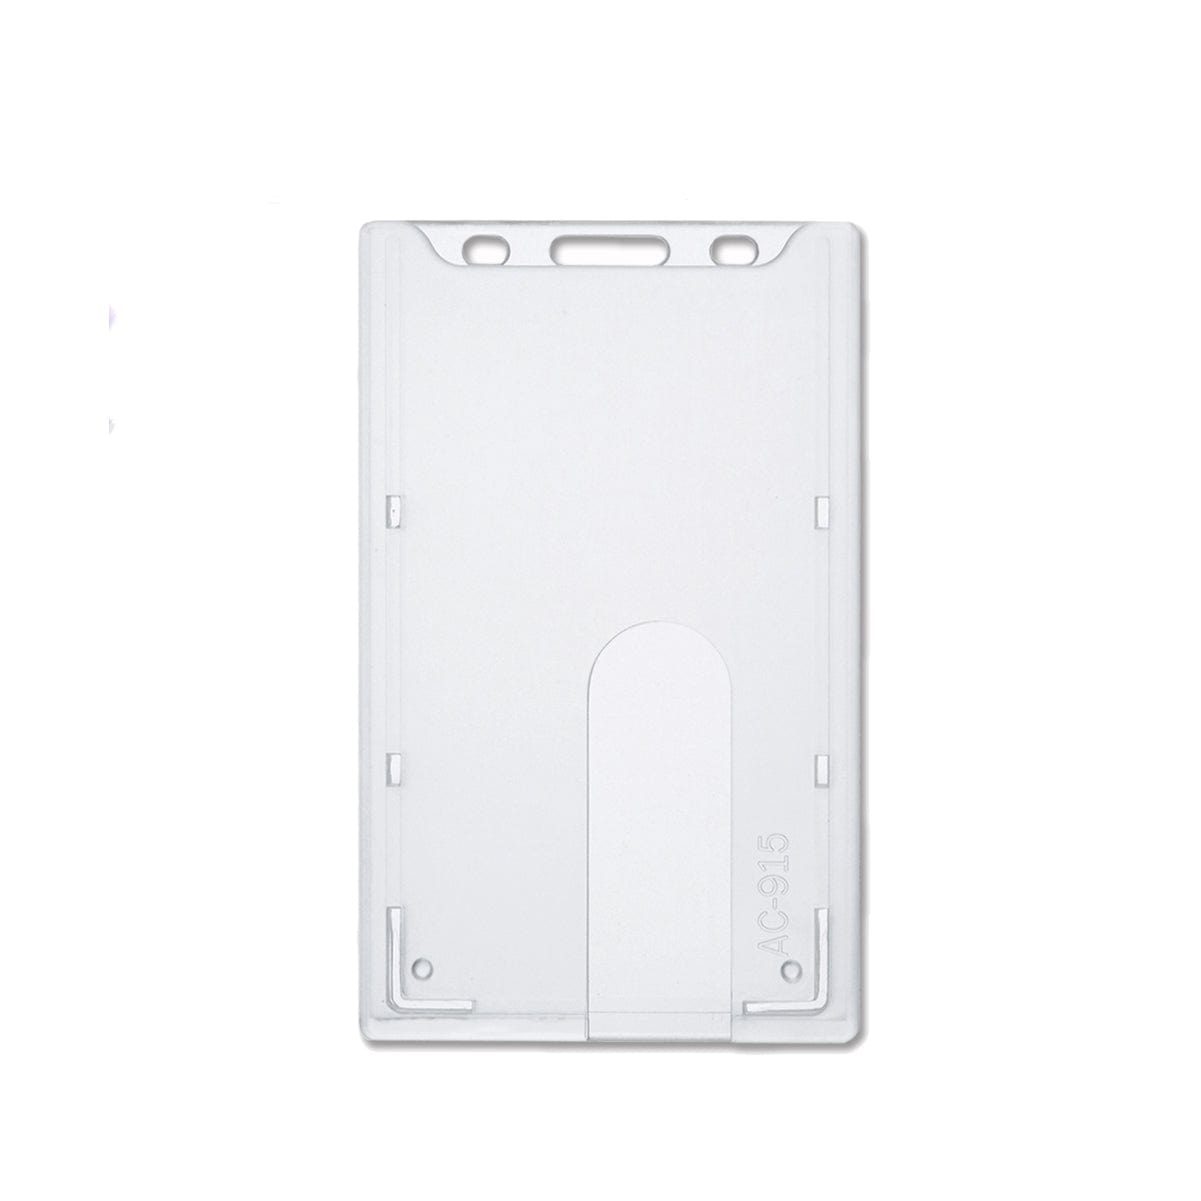 A Top Load Rigid Clear Vertical Badge Holder (AC-915) with multiple slots and cutouts for securing an ID card or badge, designed as a rigid badge protector to ensure the safe handling of smart card credentials.